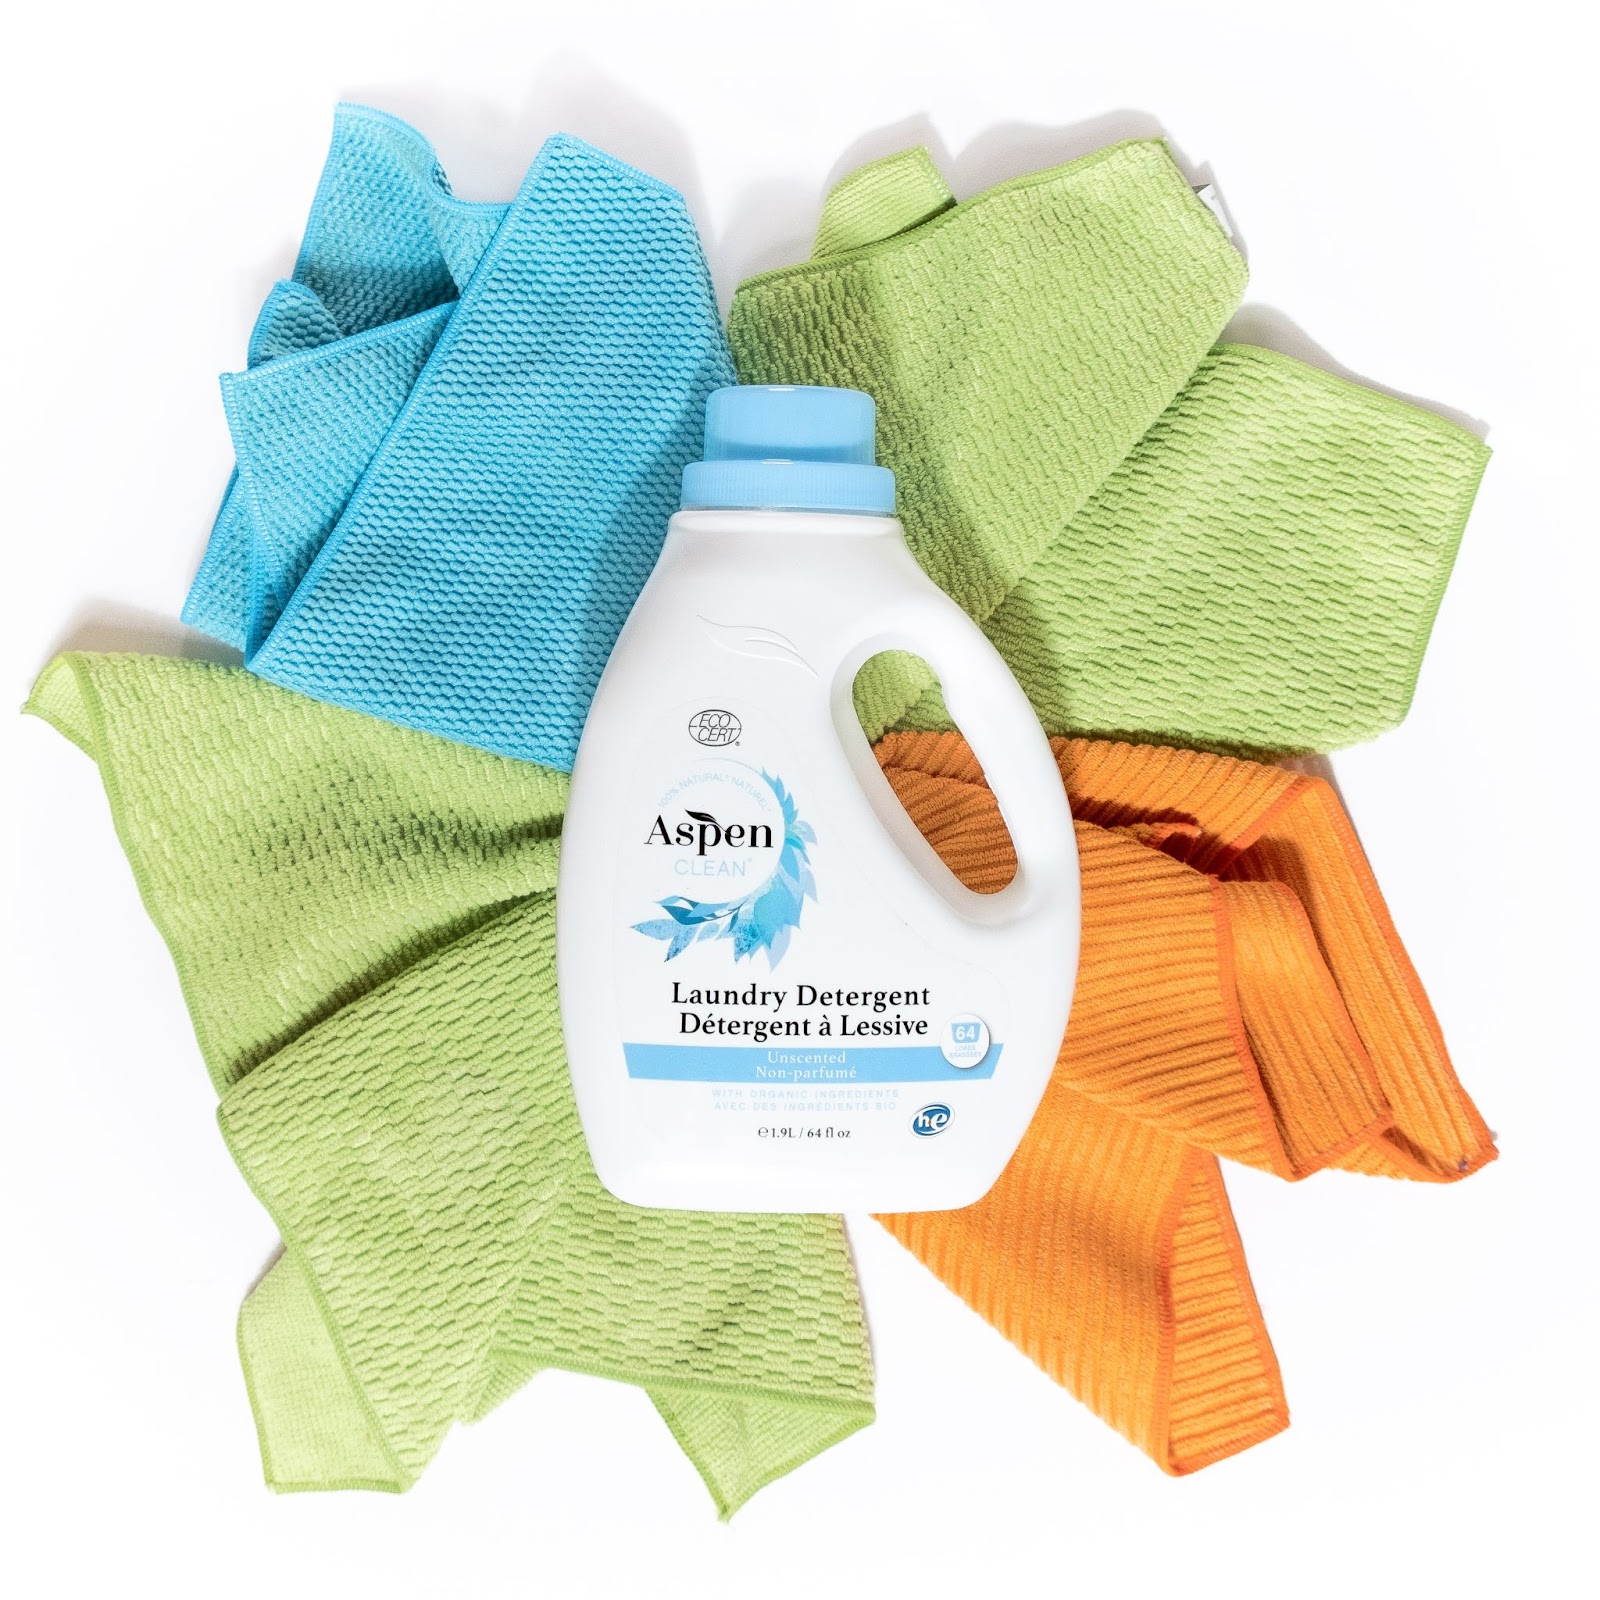 AspenClean Unscented Laundry Detergent with AspenClean Microfiber Cloths